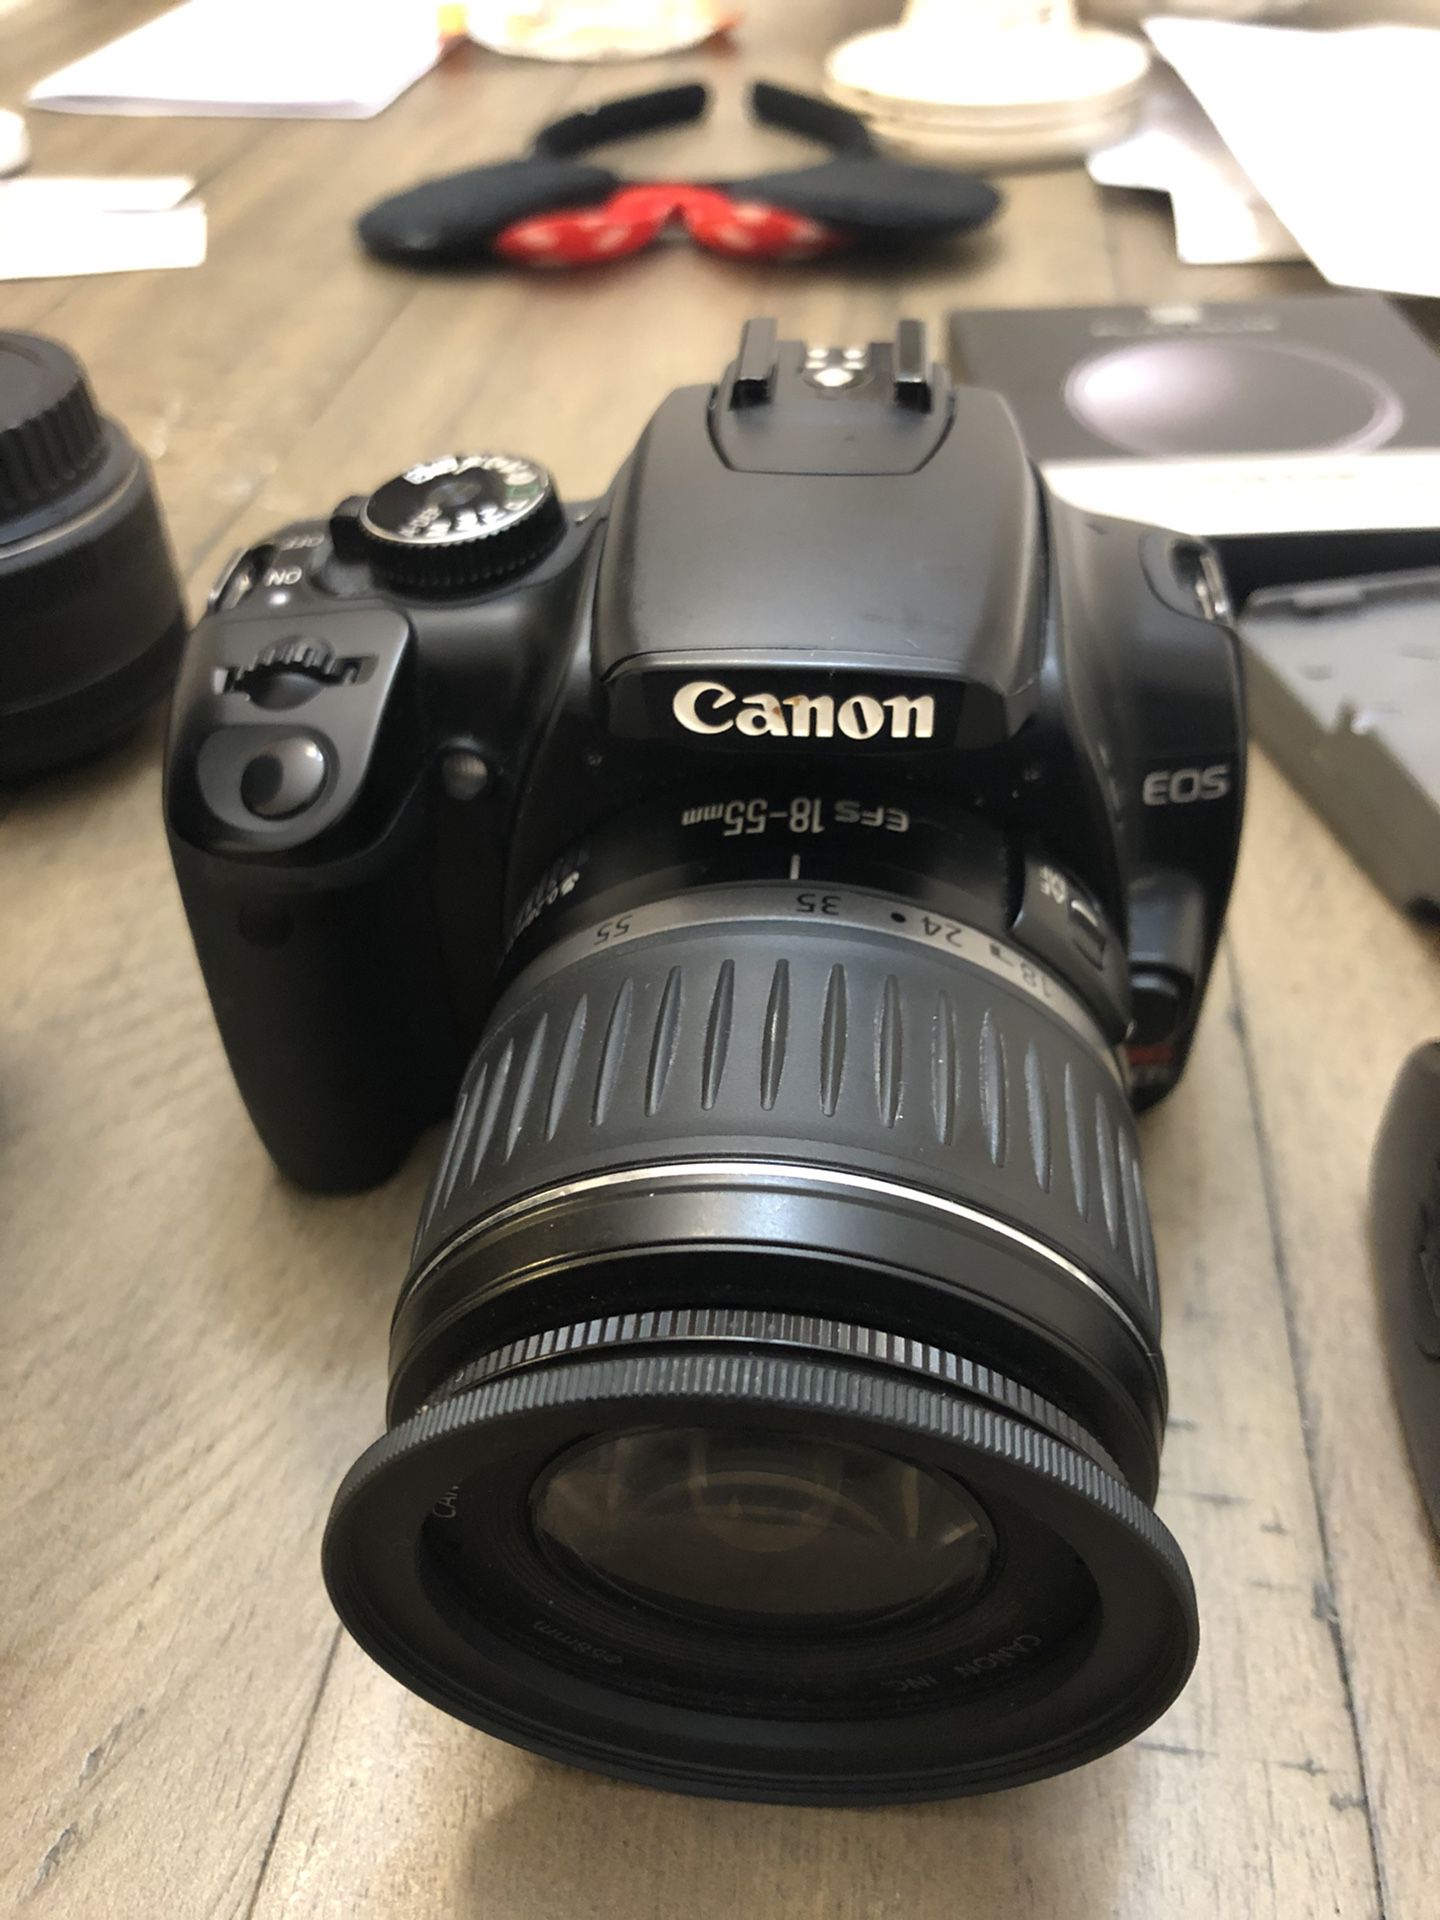 Canon EOS Rebel with accessories